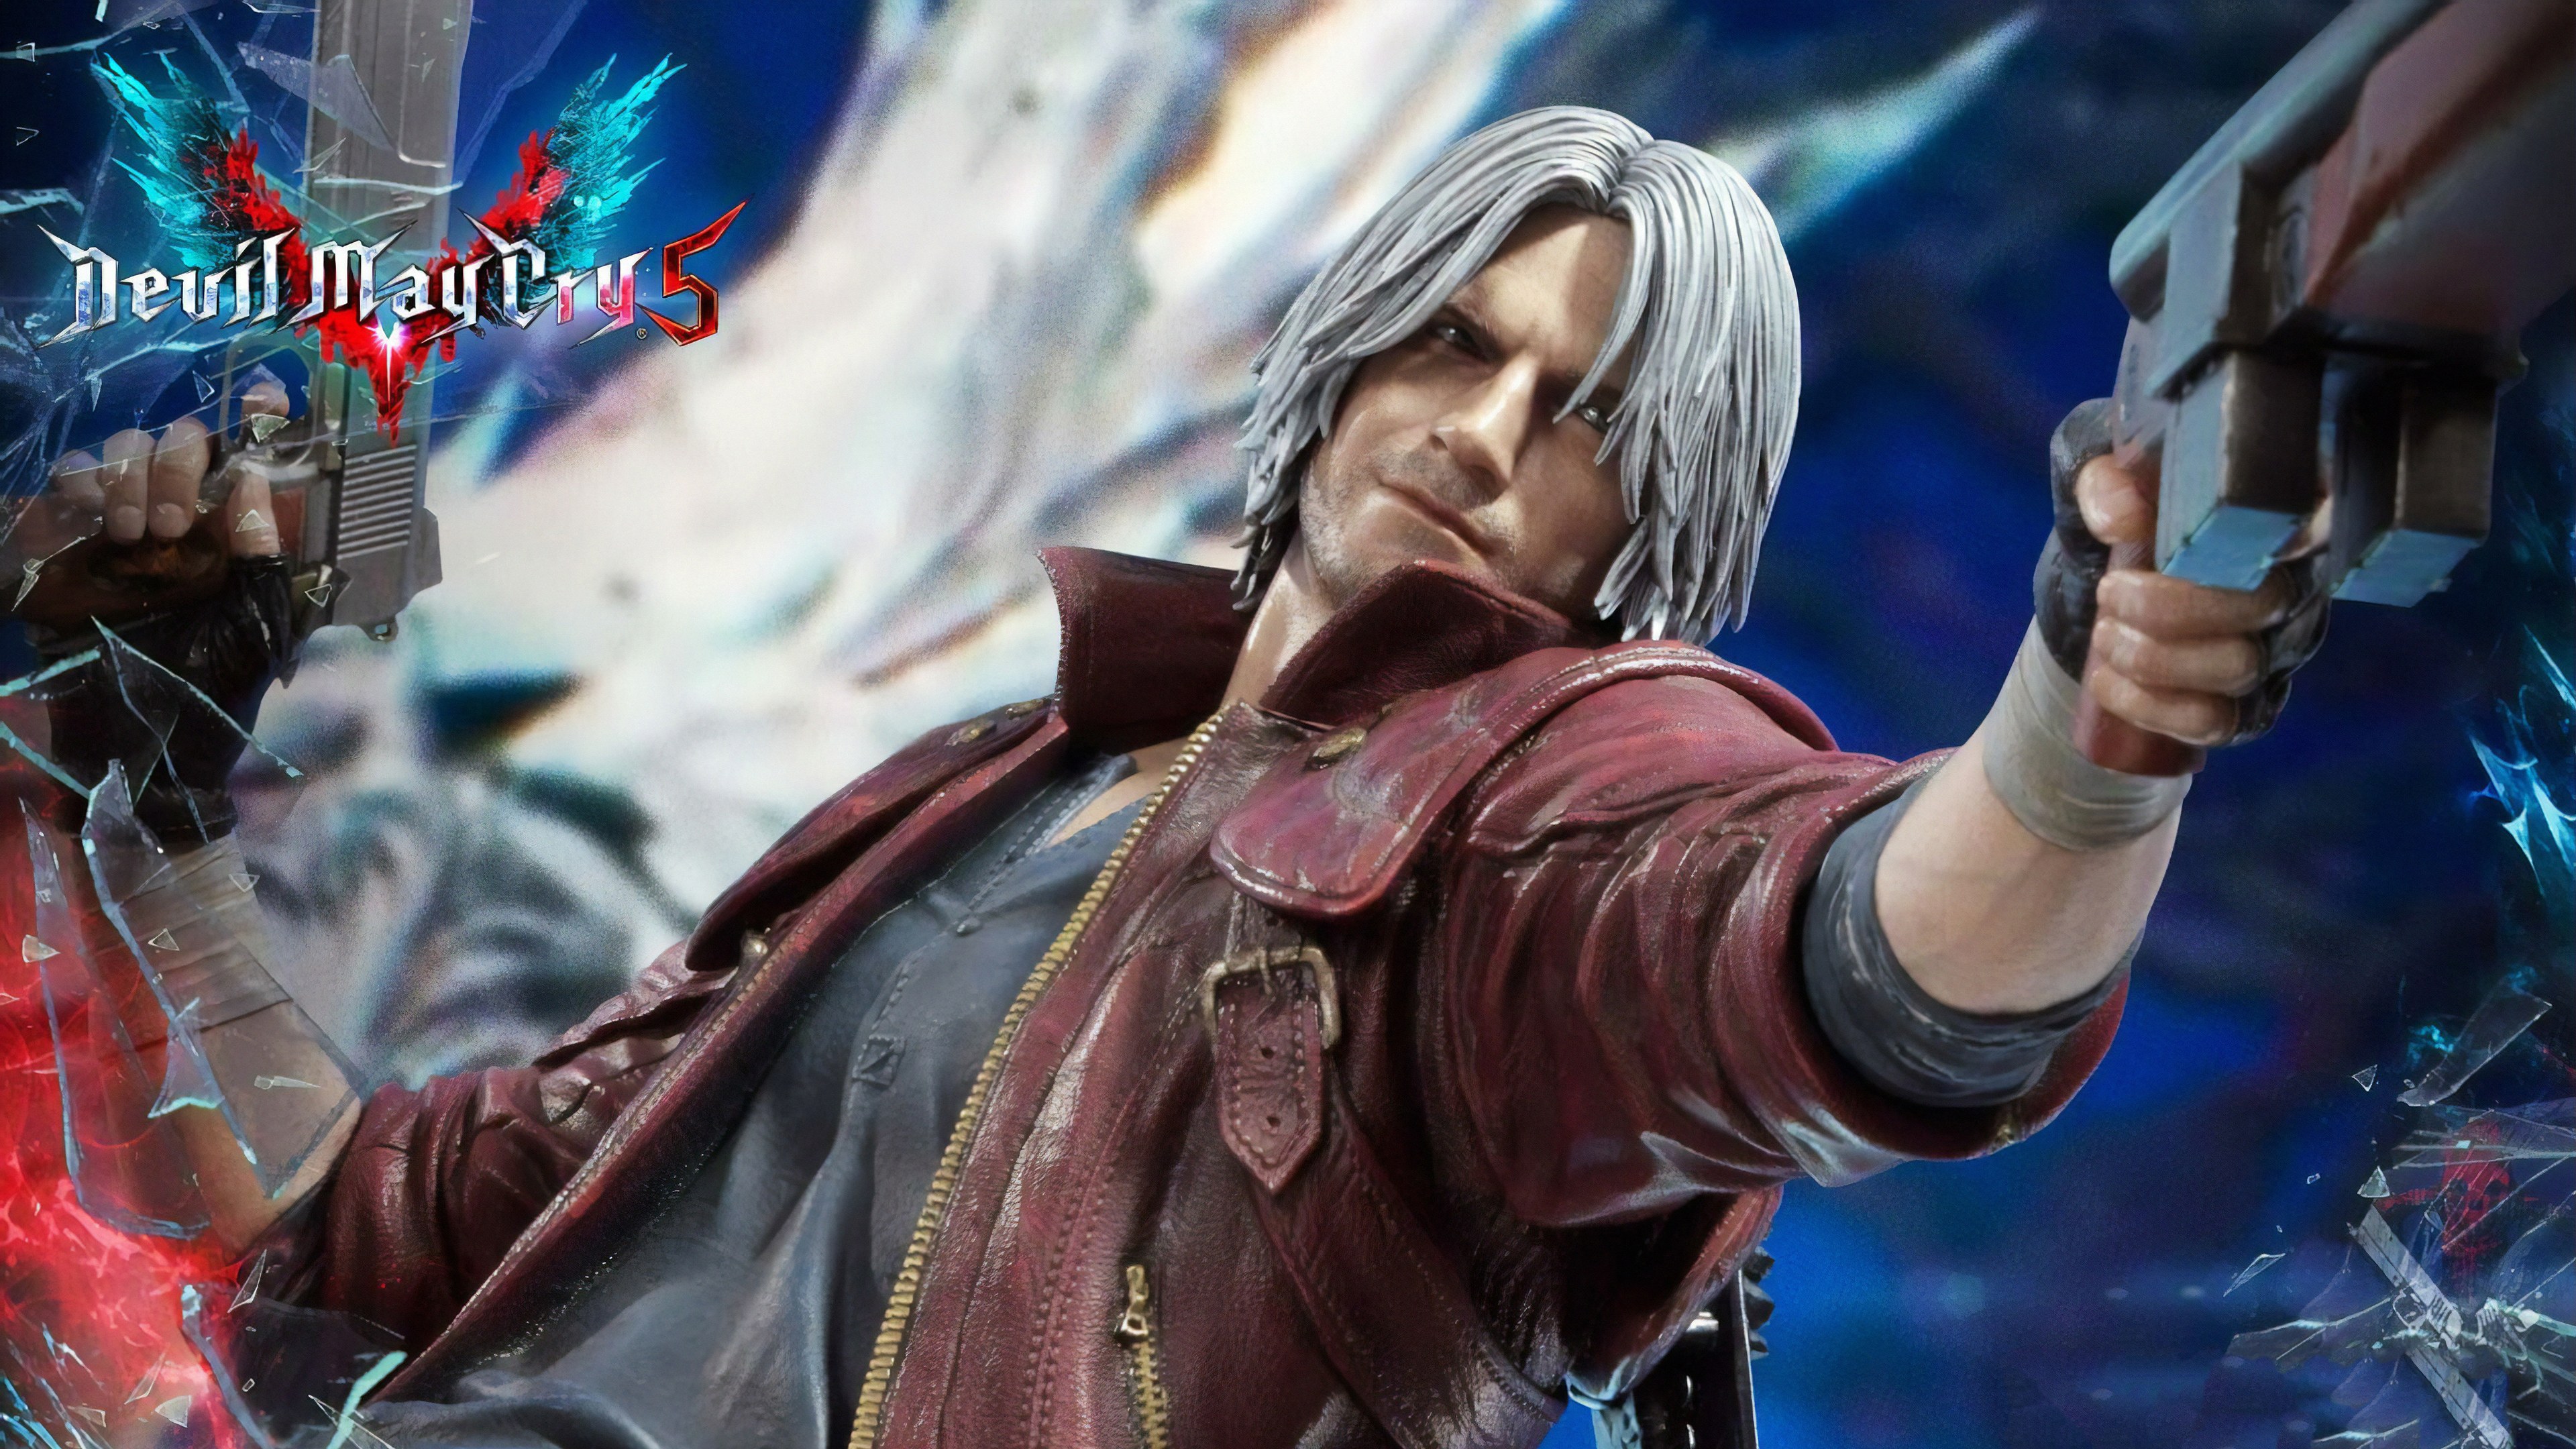 devil may cry new 1570393180 - Devil May Cry New - hd-wallpapers, games wallpapers, devil may cry 5 wallpapers, 4k-wallpapers, 2019 games wallpapers